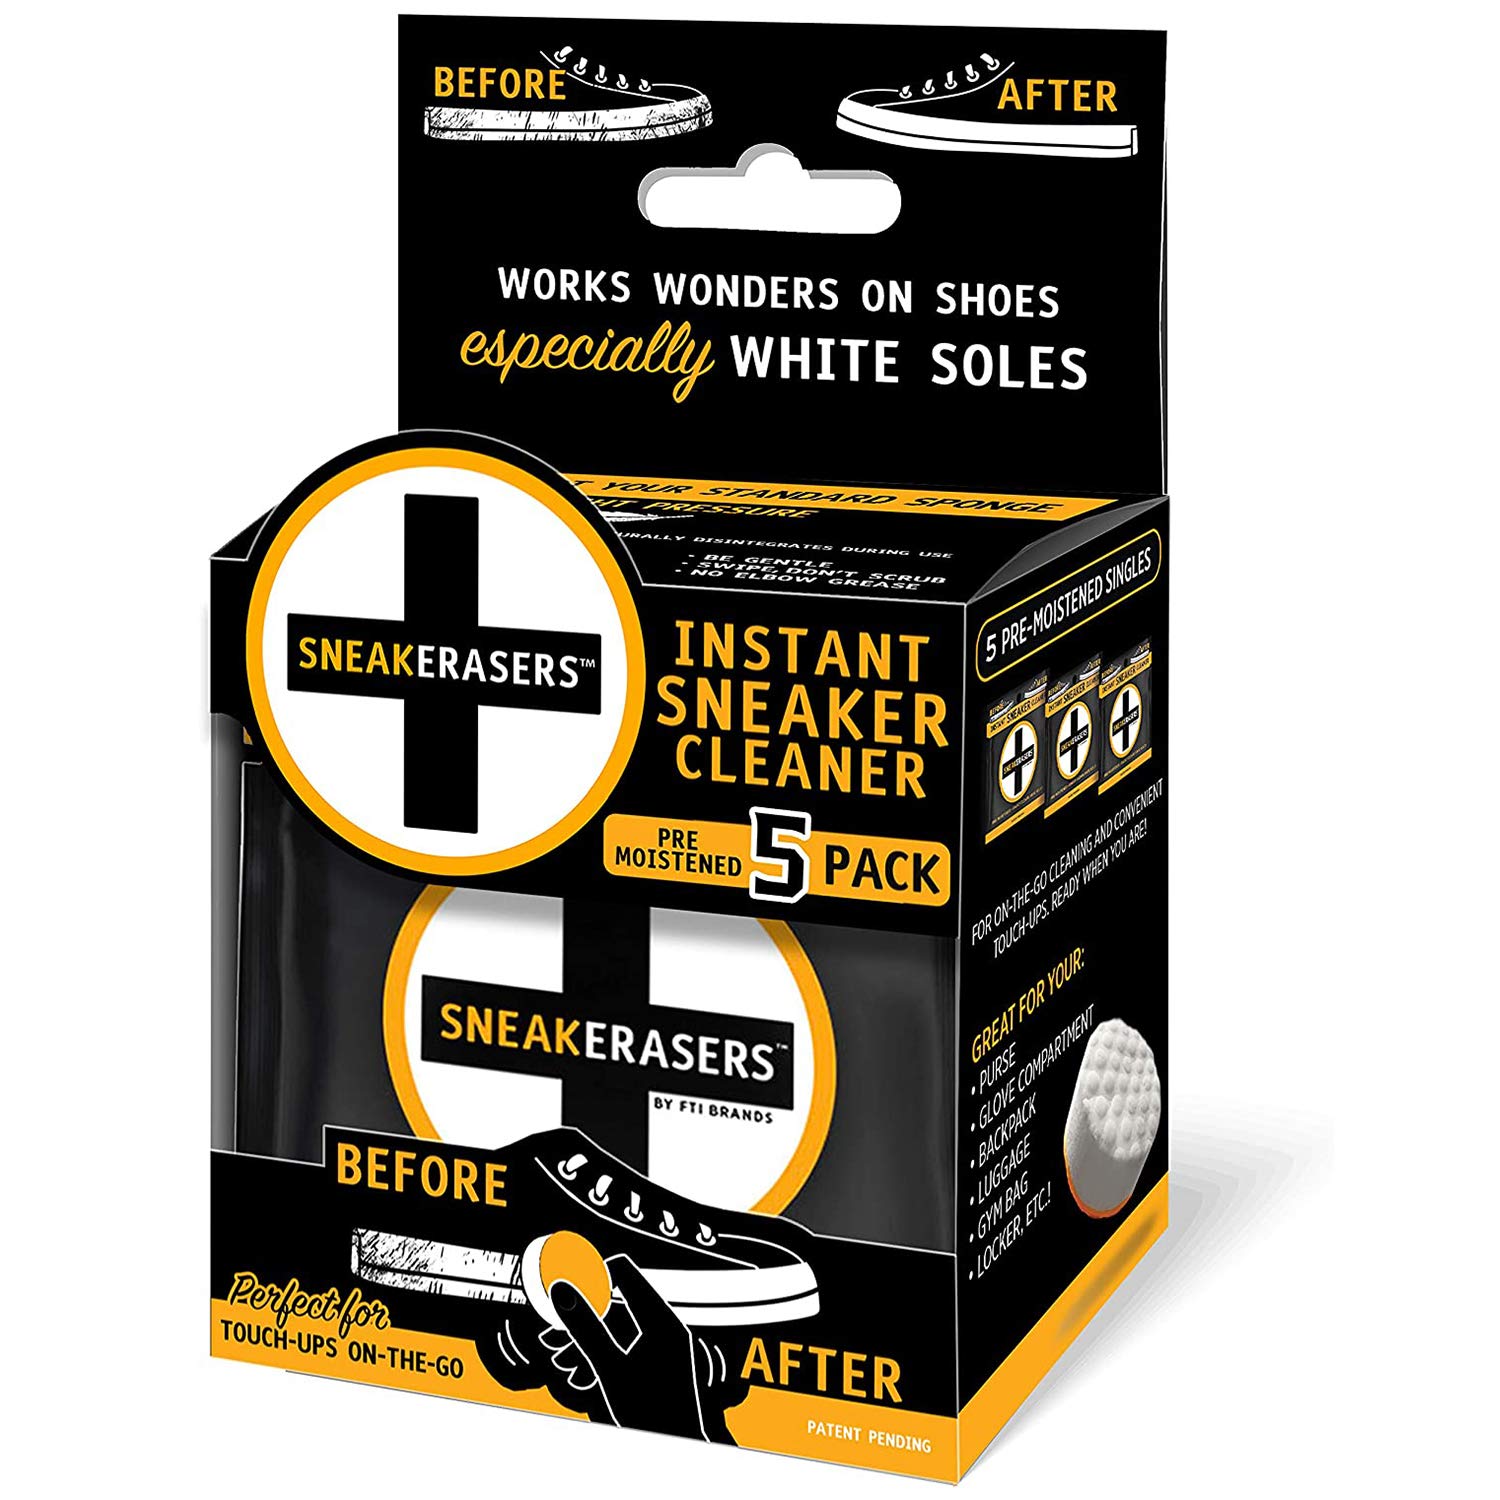 Whatever Happened To SneakERASERS Shoe Cleaner After Shark Tank Season 12?